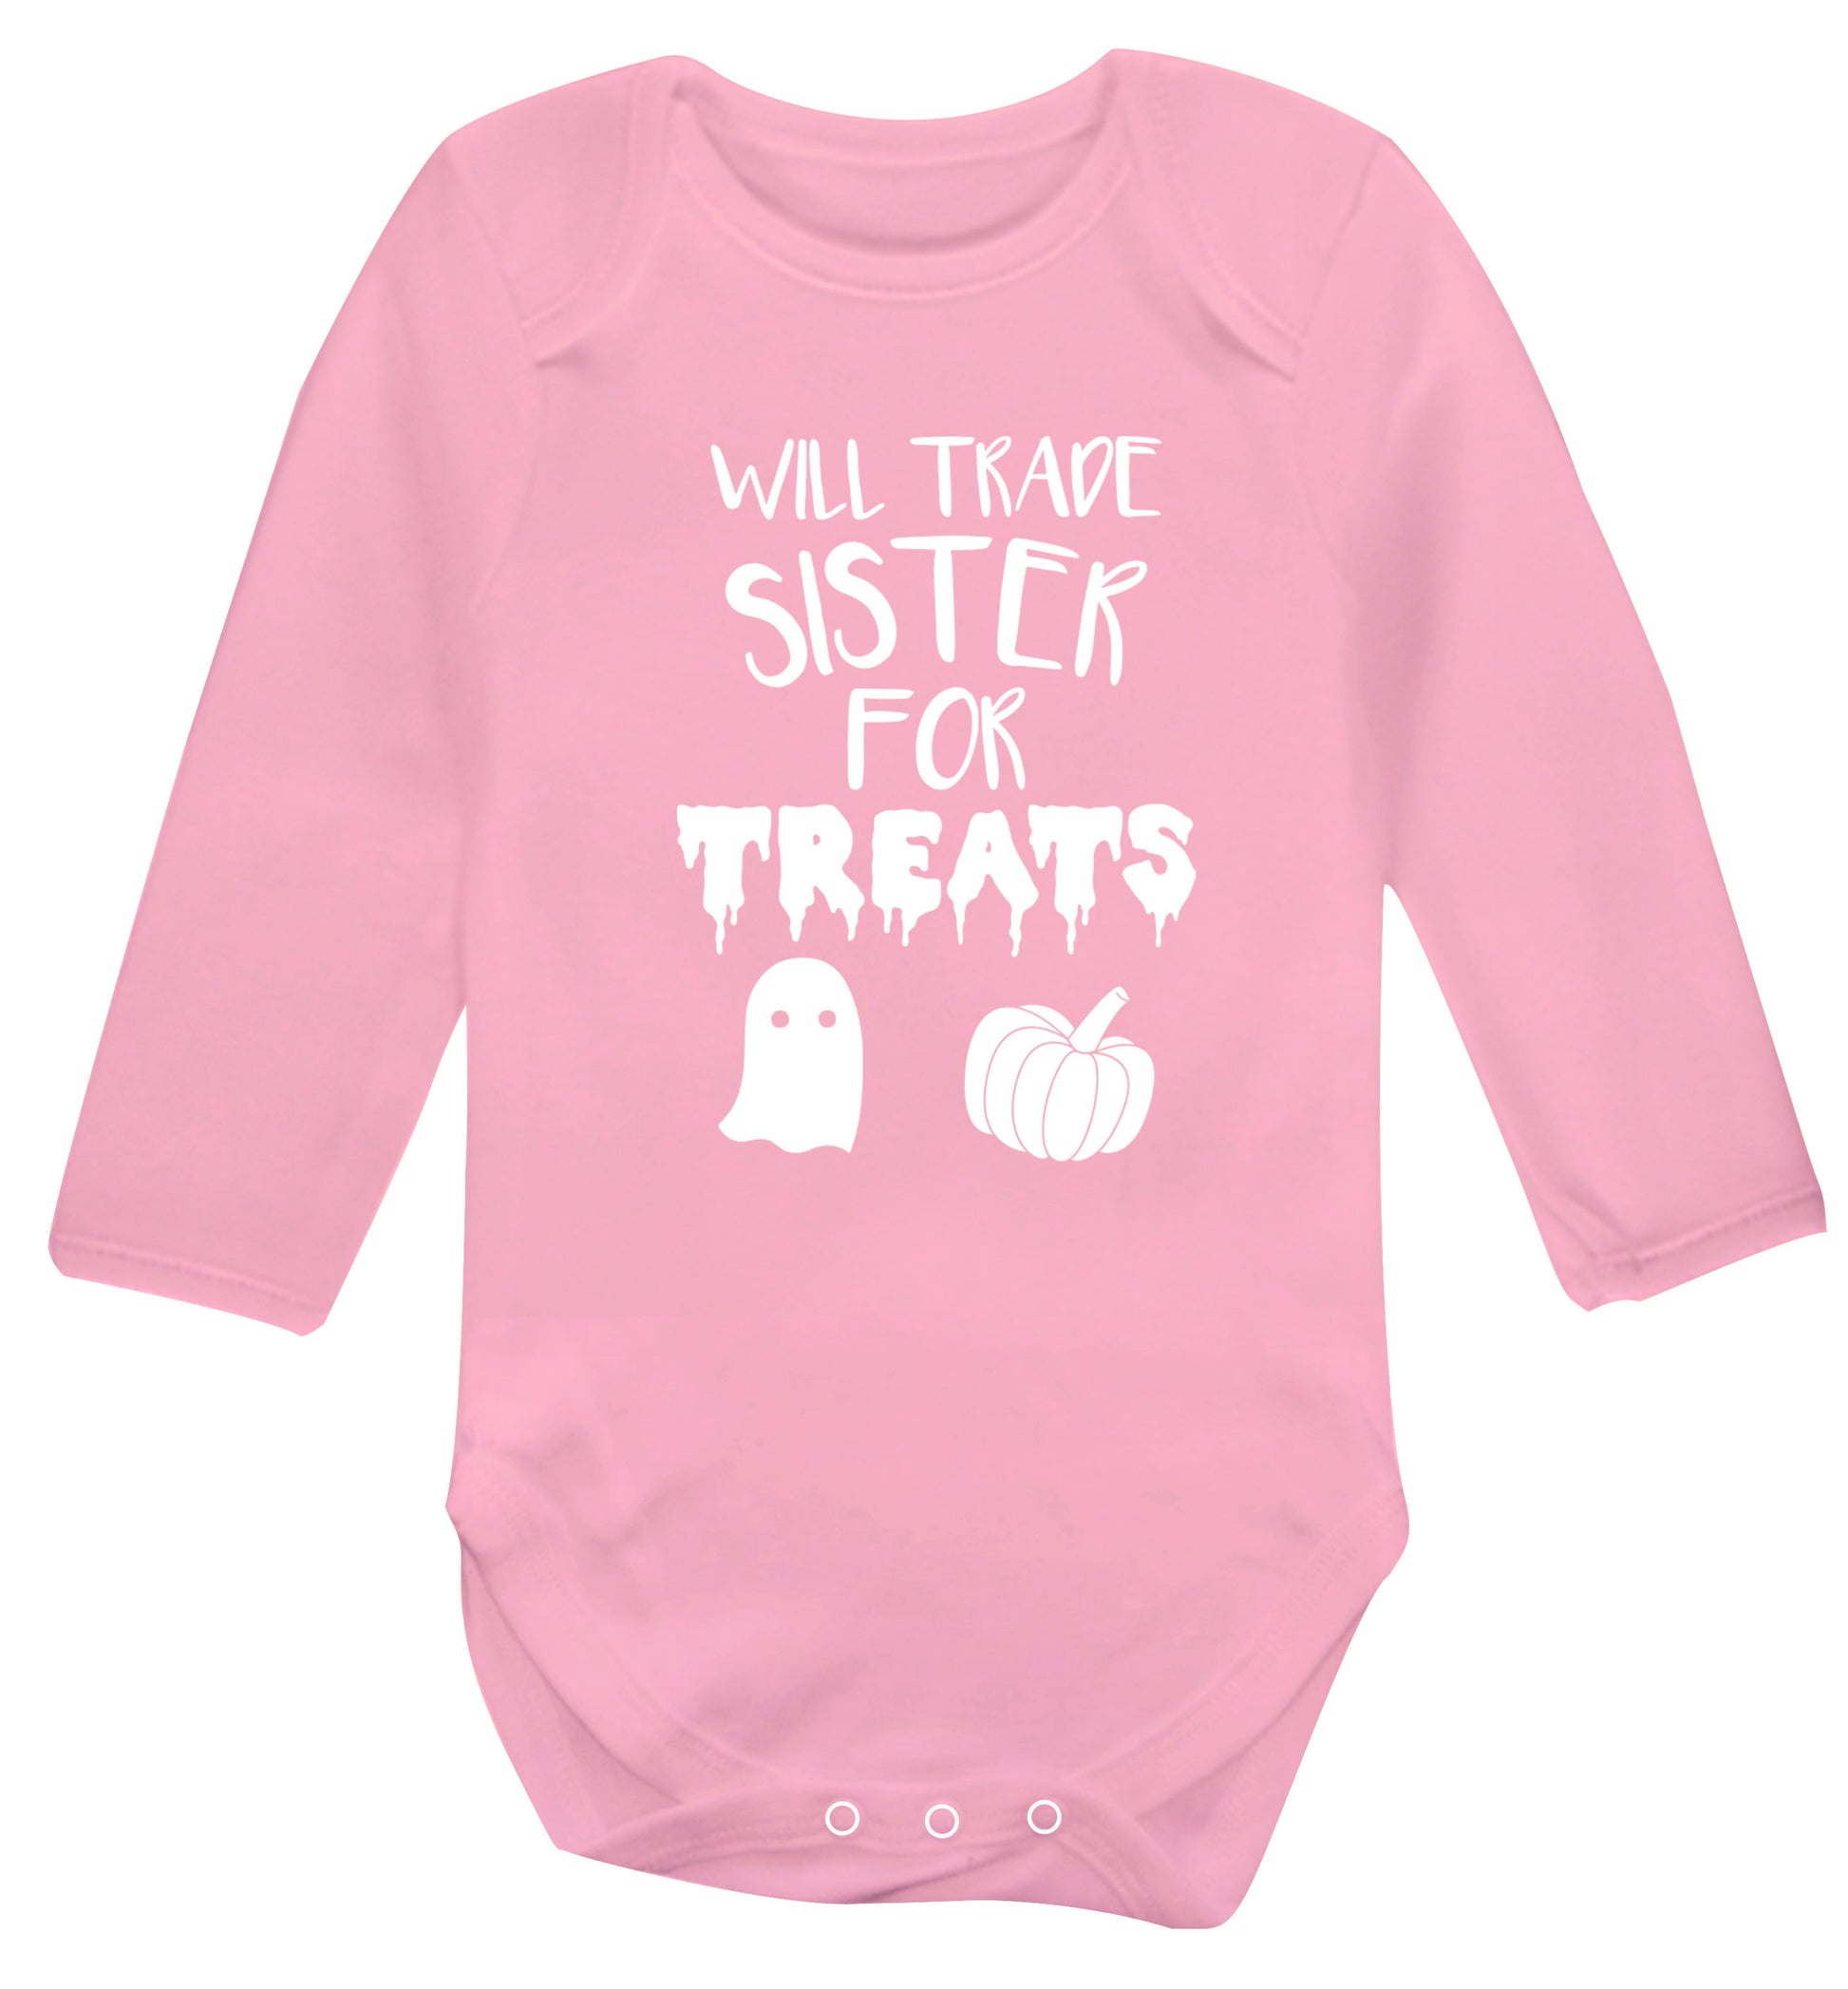 Will trade sister for treats Baby Vest long sleeved pale pink 6-12 months